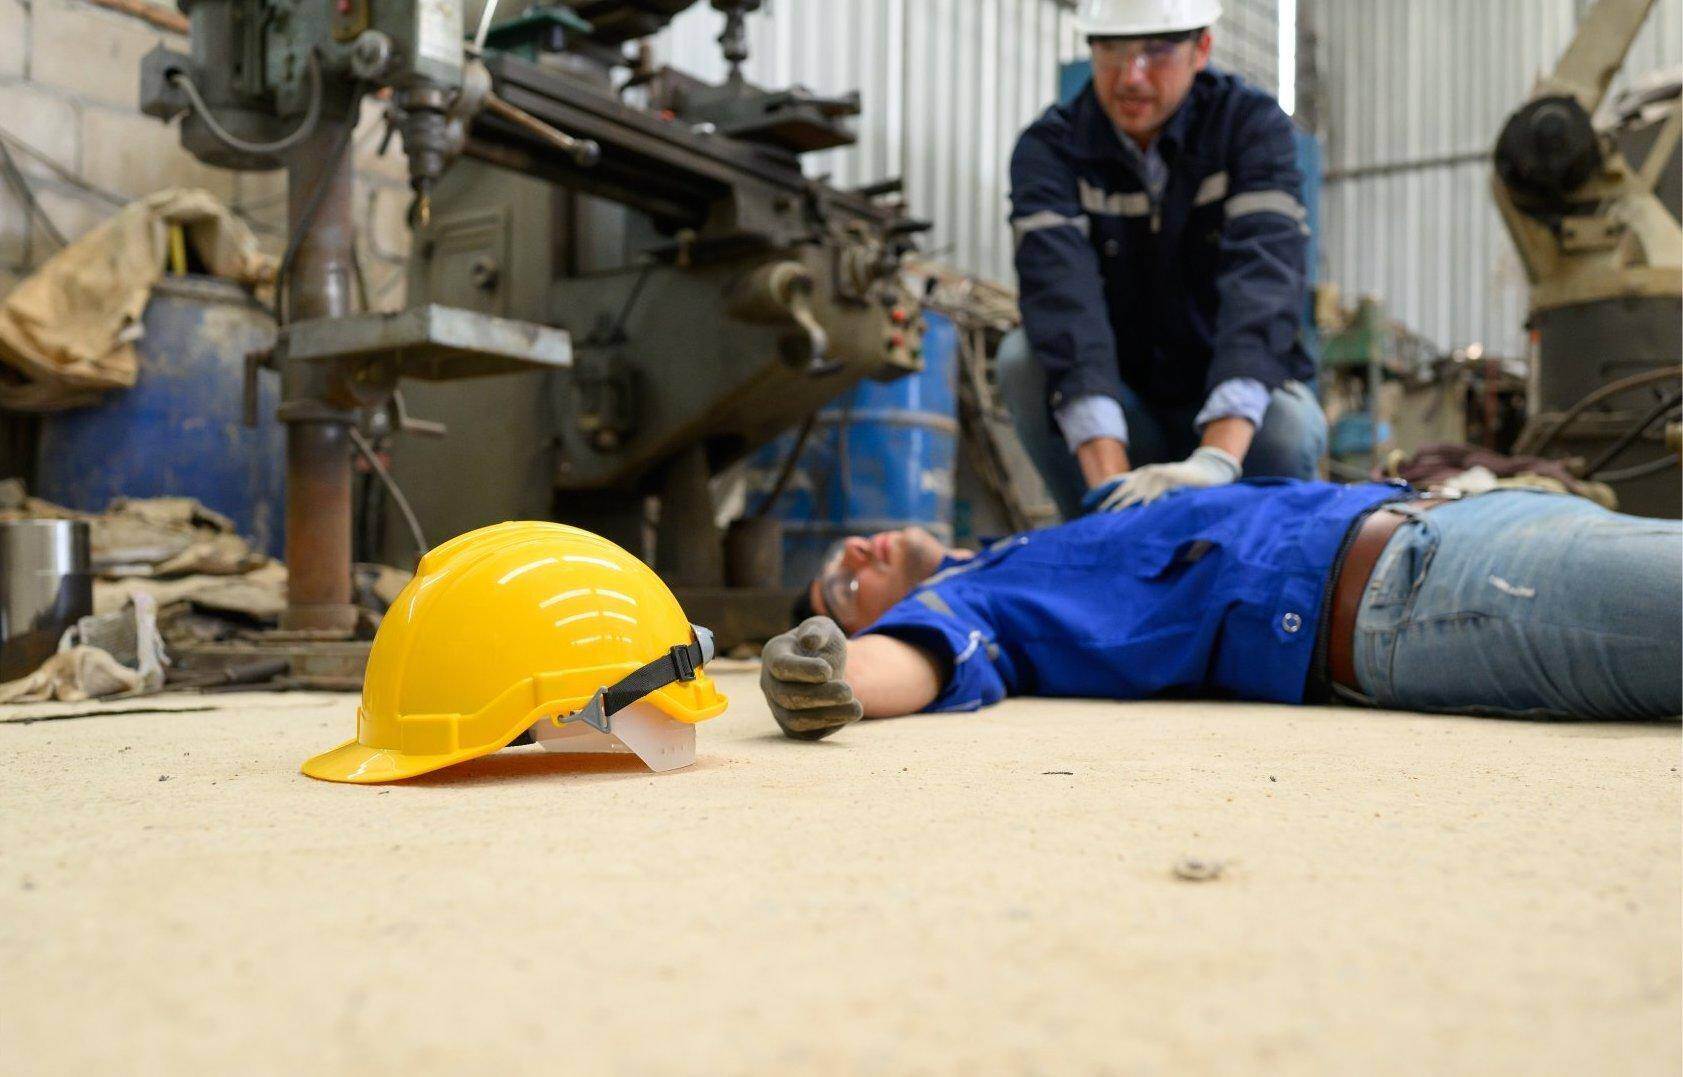 An unconscious man who has been injured on the job who will file for workers compensation in Mountain Park, Georgia